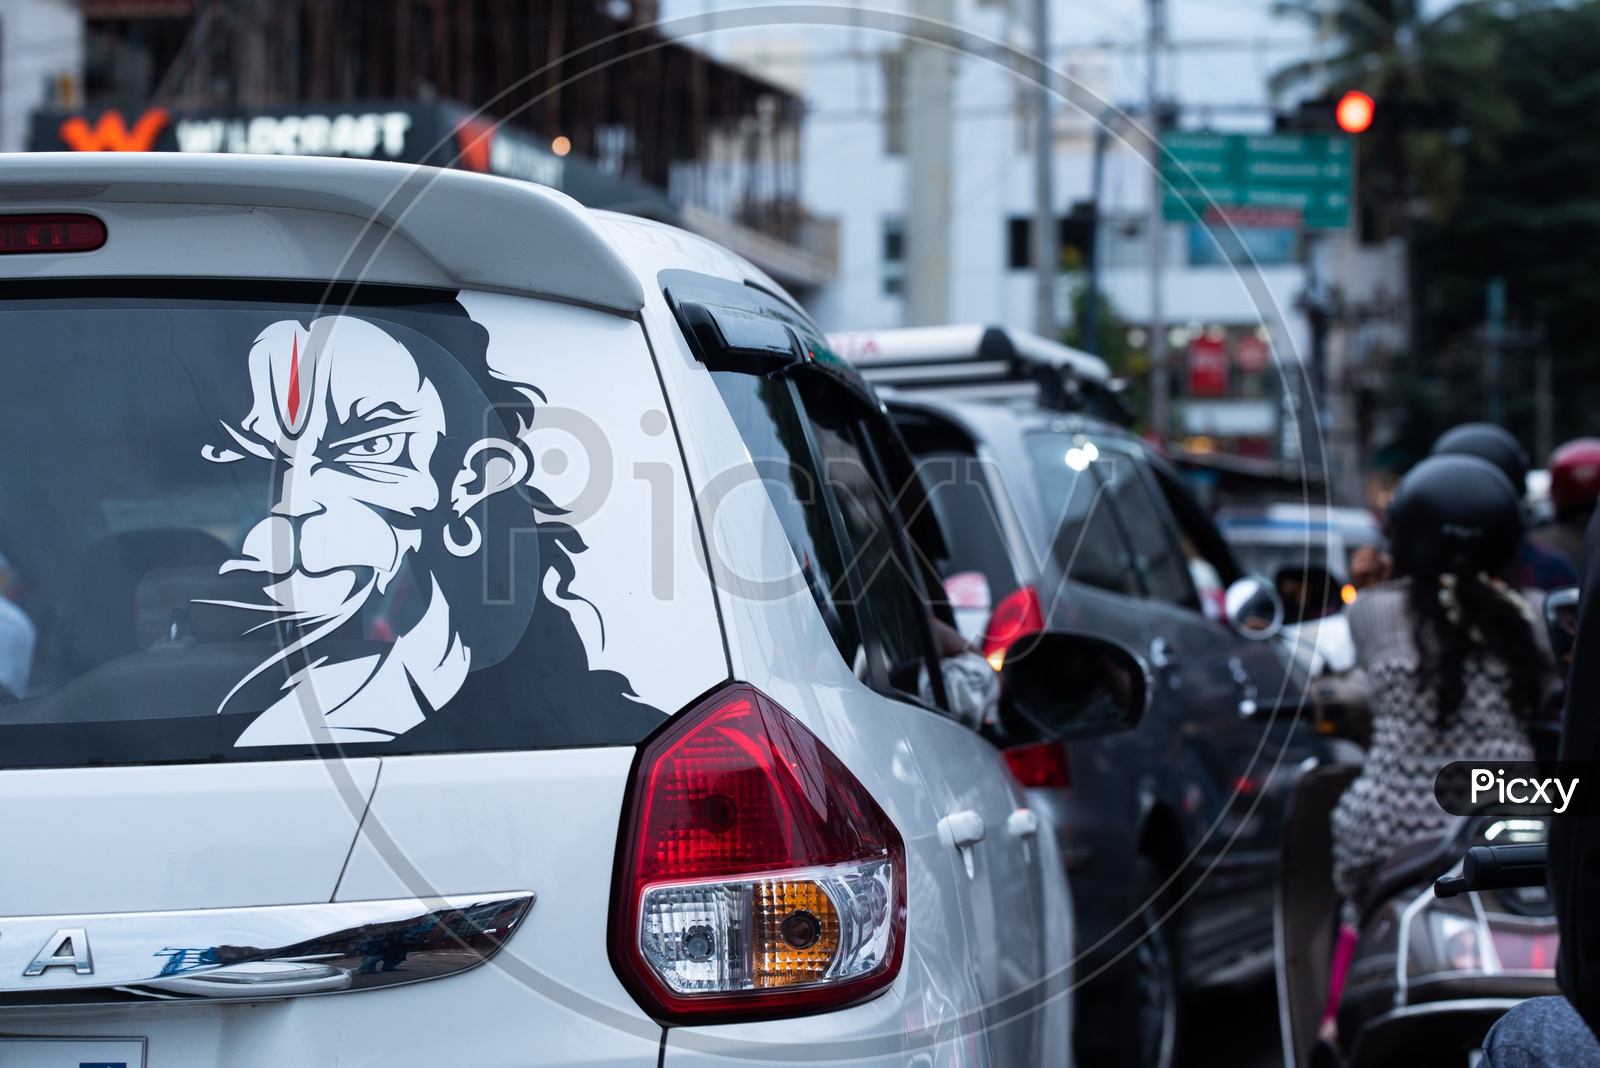 Angry Hanuman Poster on the back of a Car